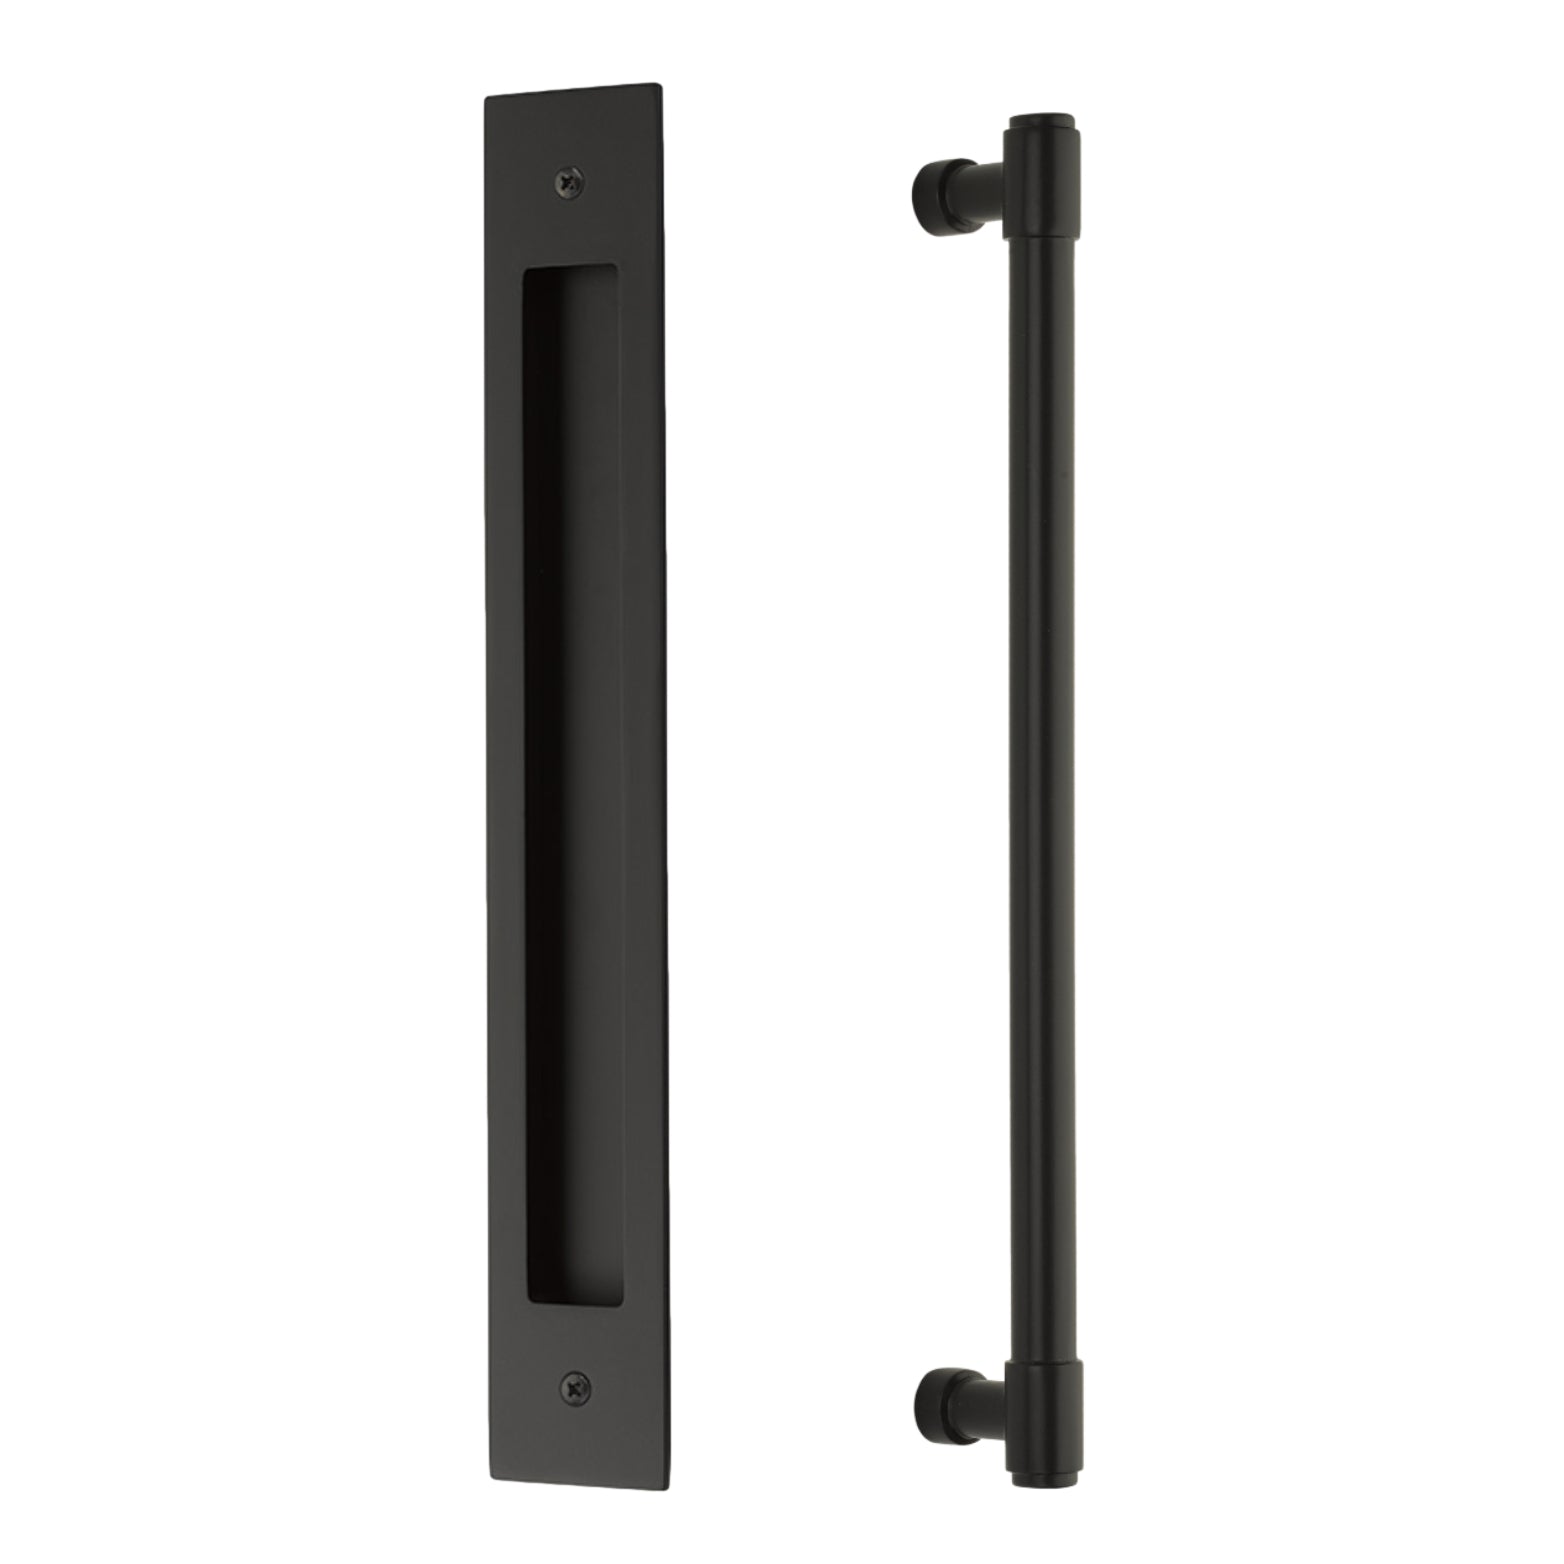 Door Flush Pull and 12" Handle Back to Back Hardware for Interior Sliding and Barn Doors - Industry Hardware